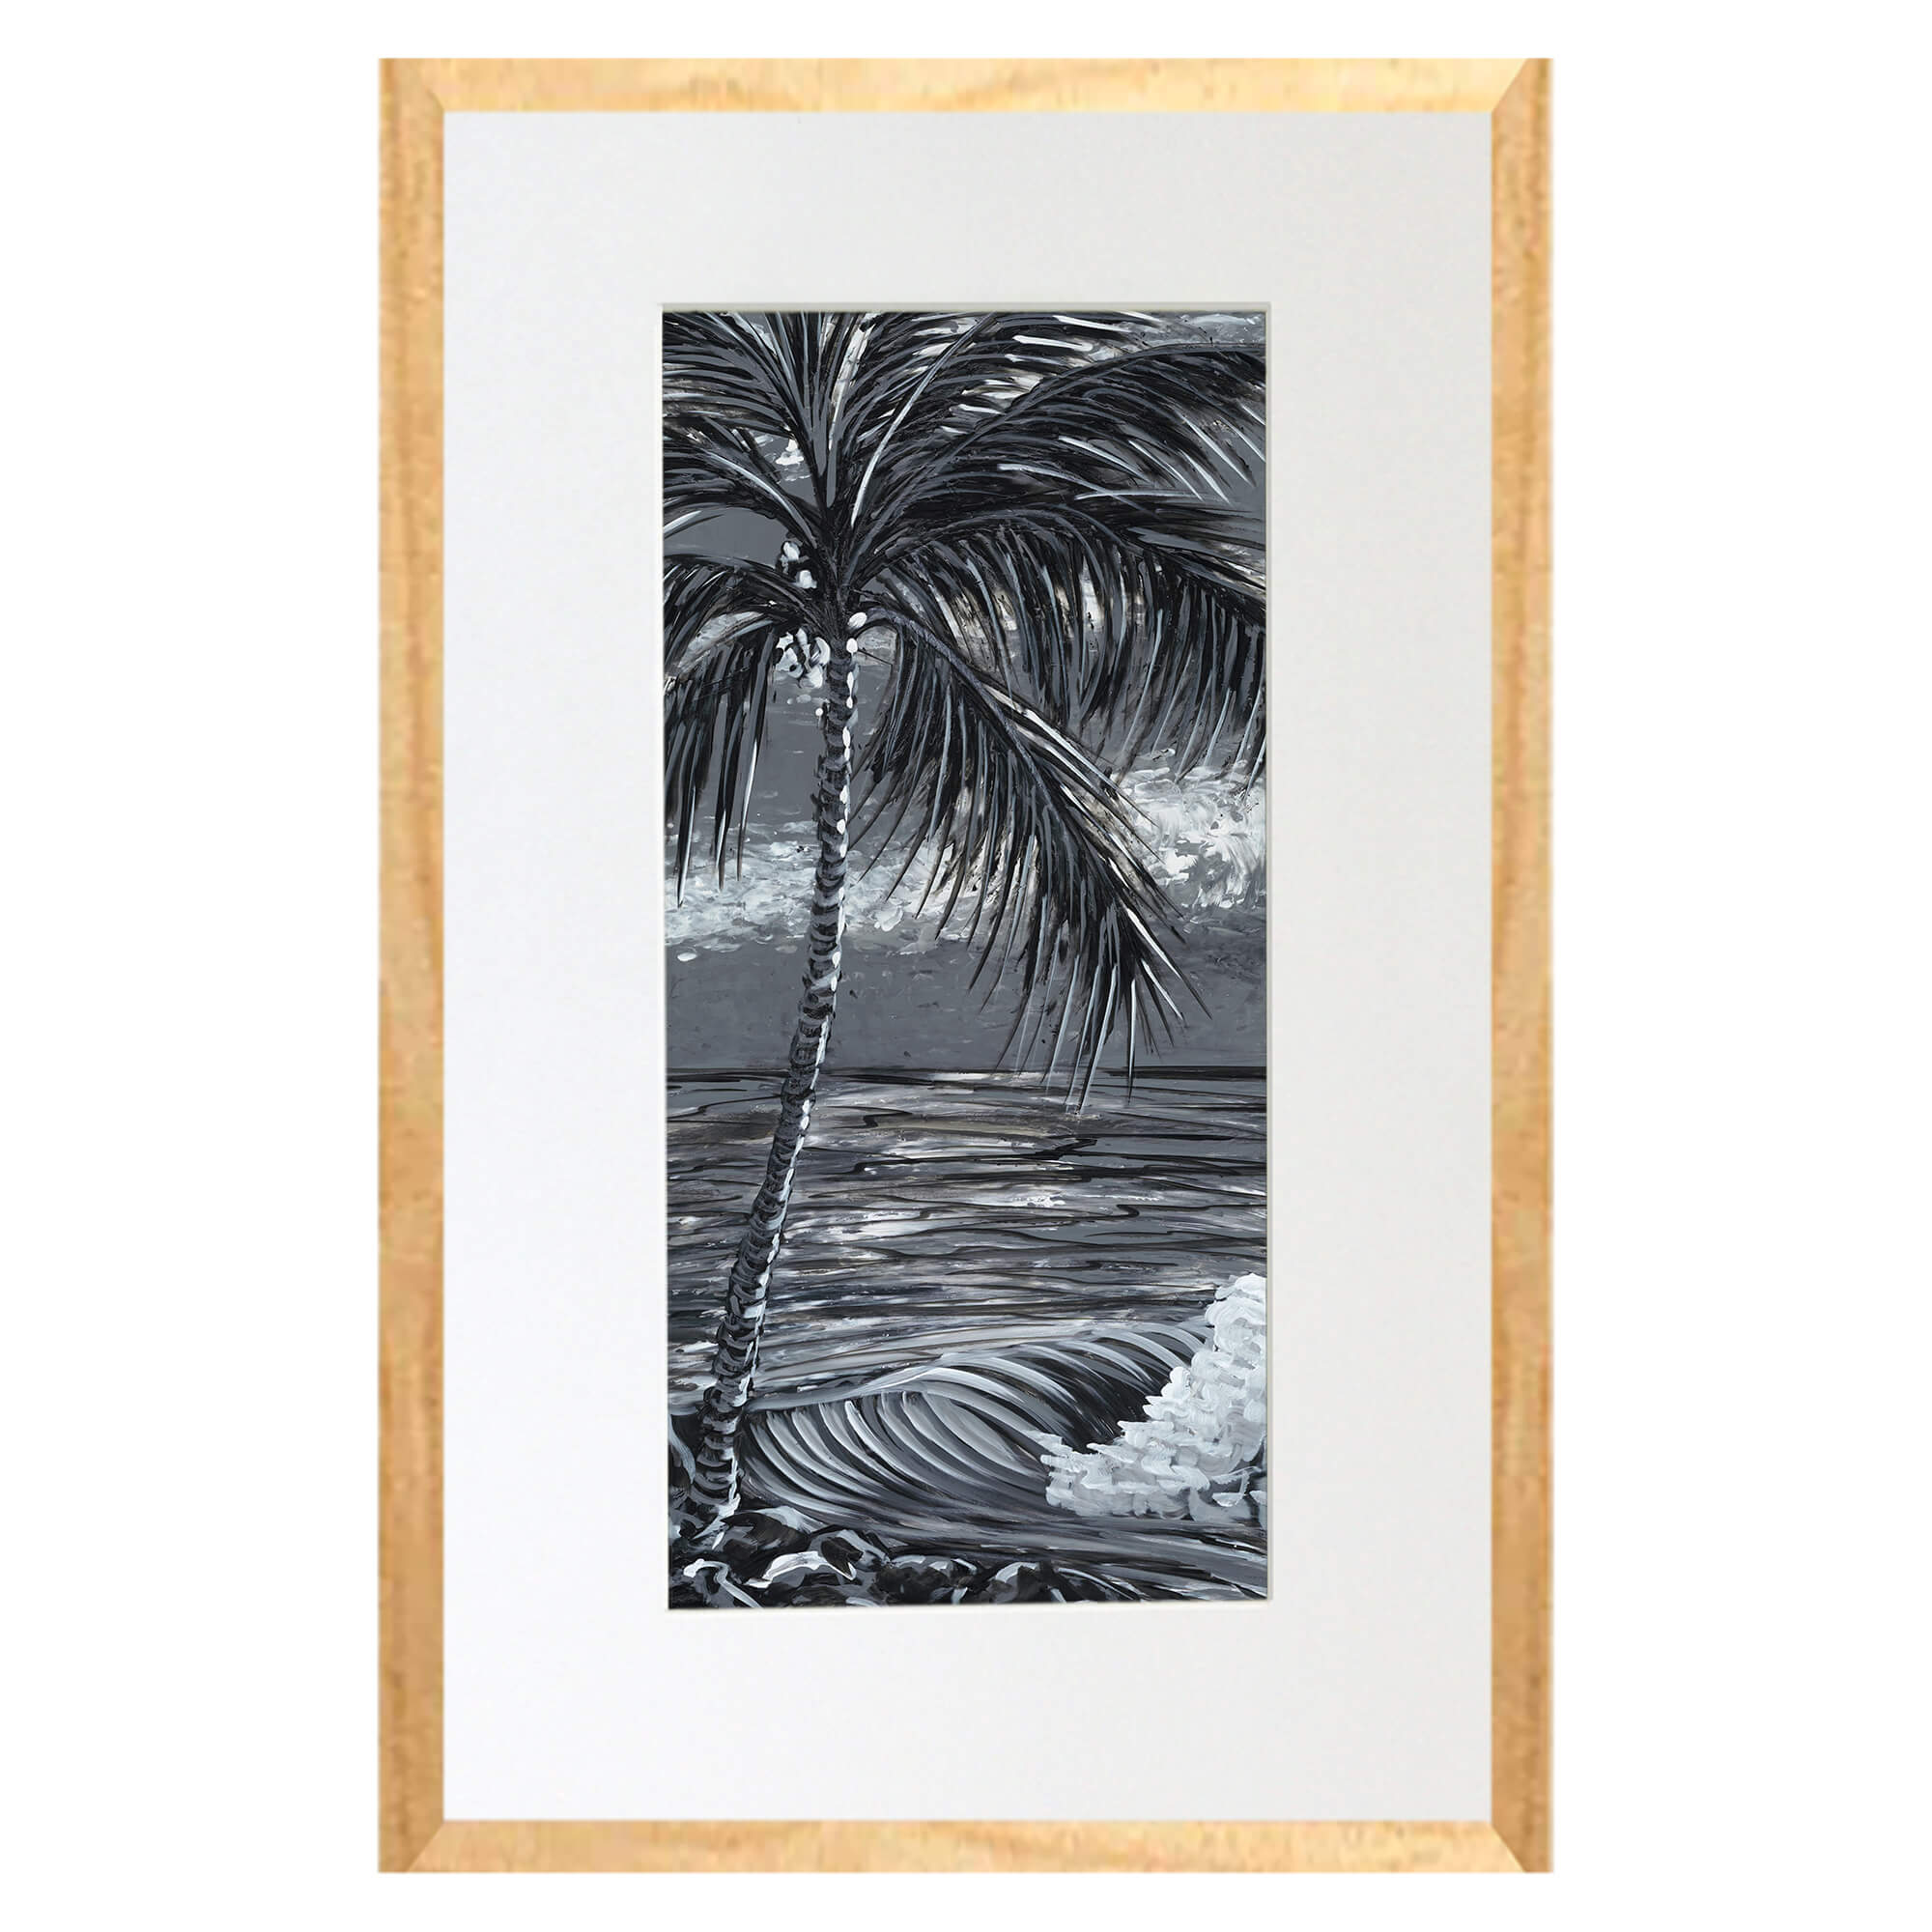 Matted art print with wood frame showcasing small rocks by hawaii artist Suzanne MacAdam